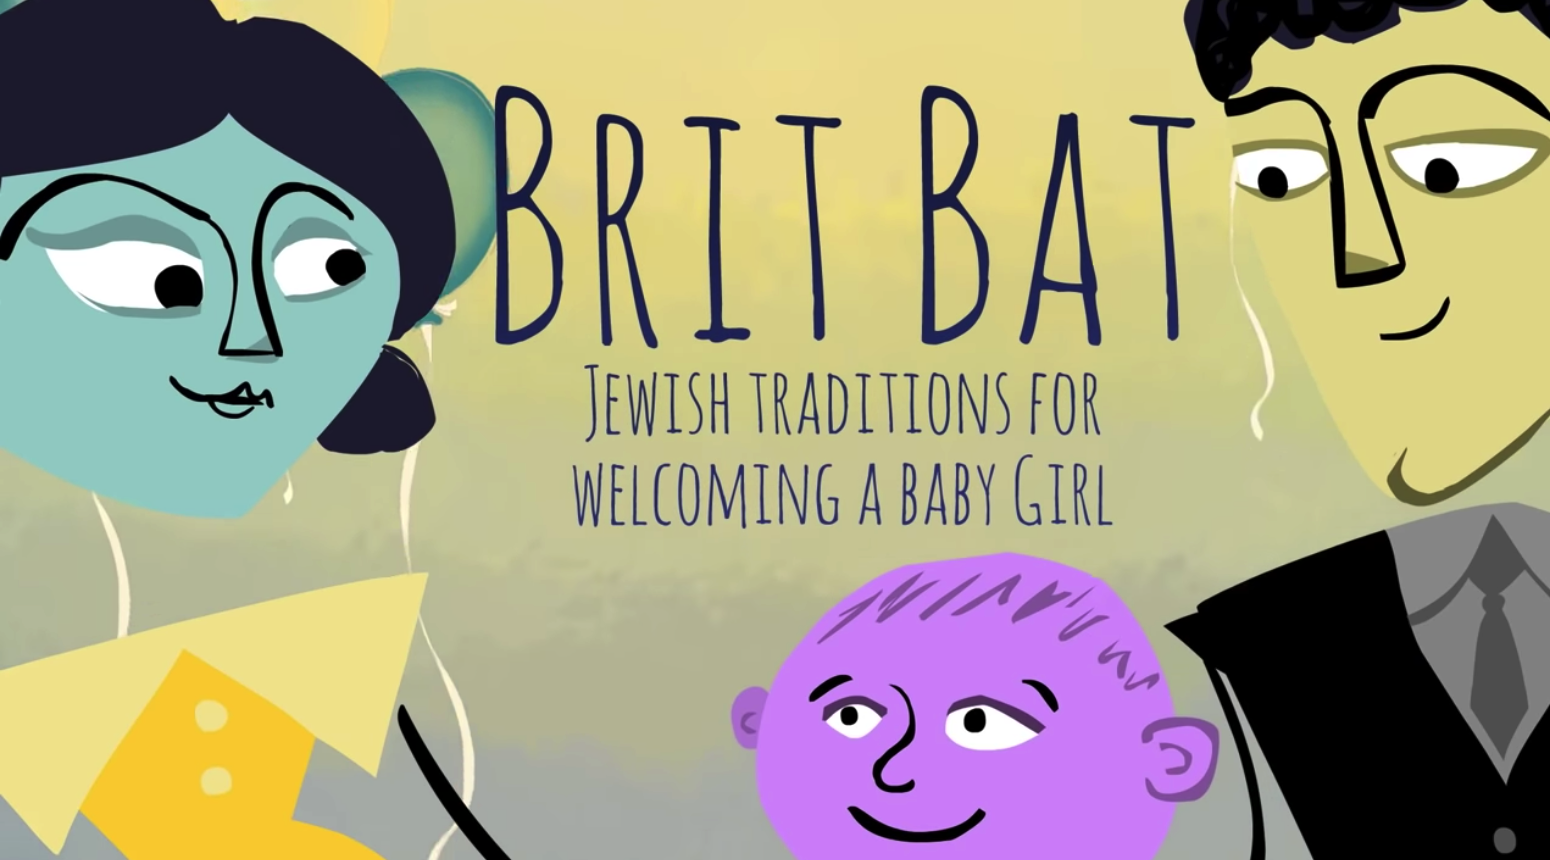 brit bat jewish traditions for welcoming a baby girl